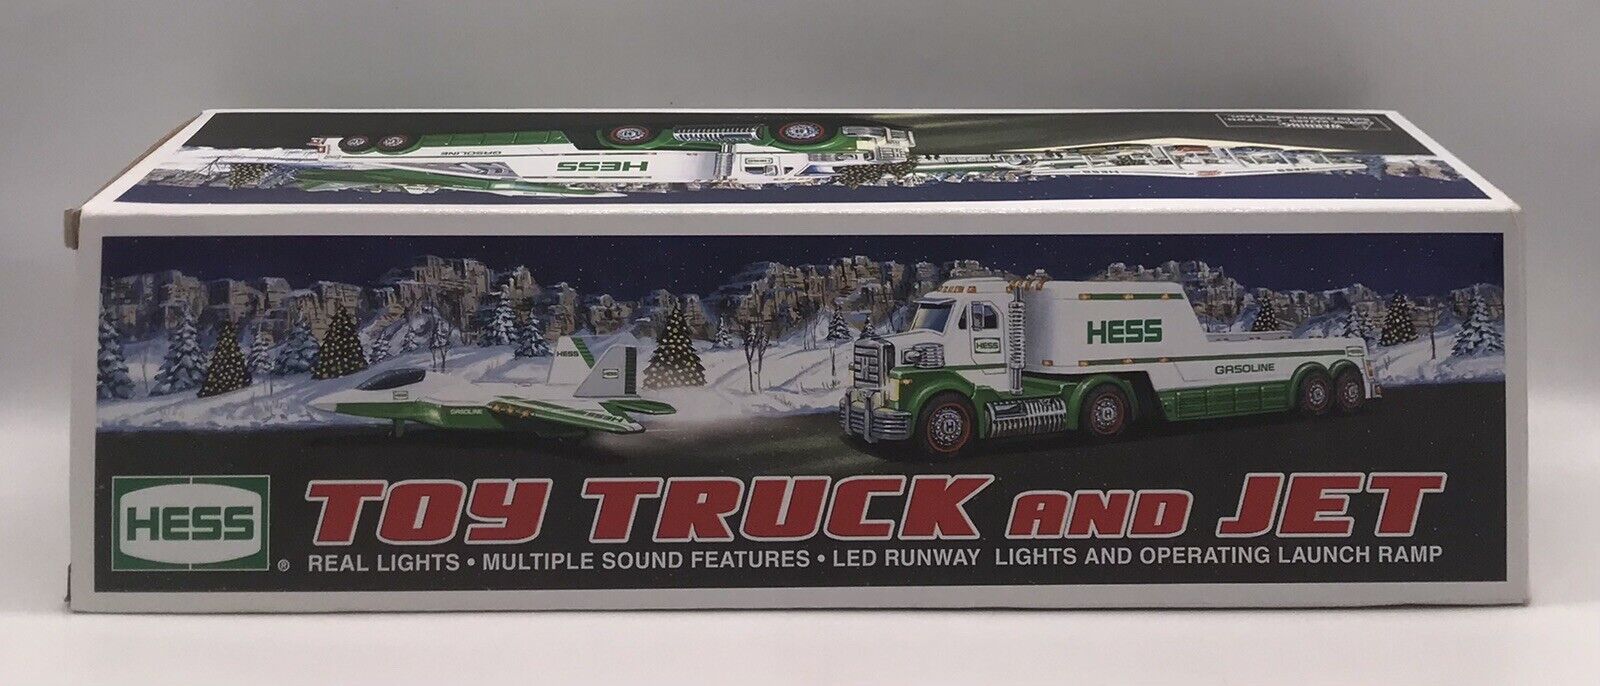 2010 Hess Toy Truck and Jet